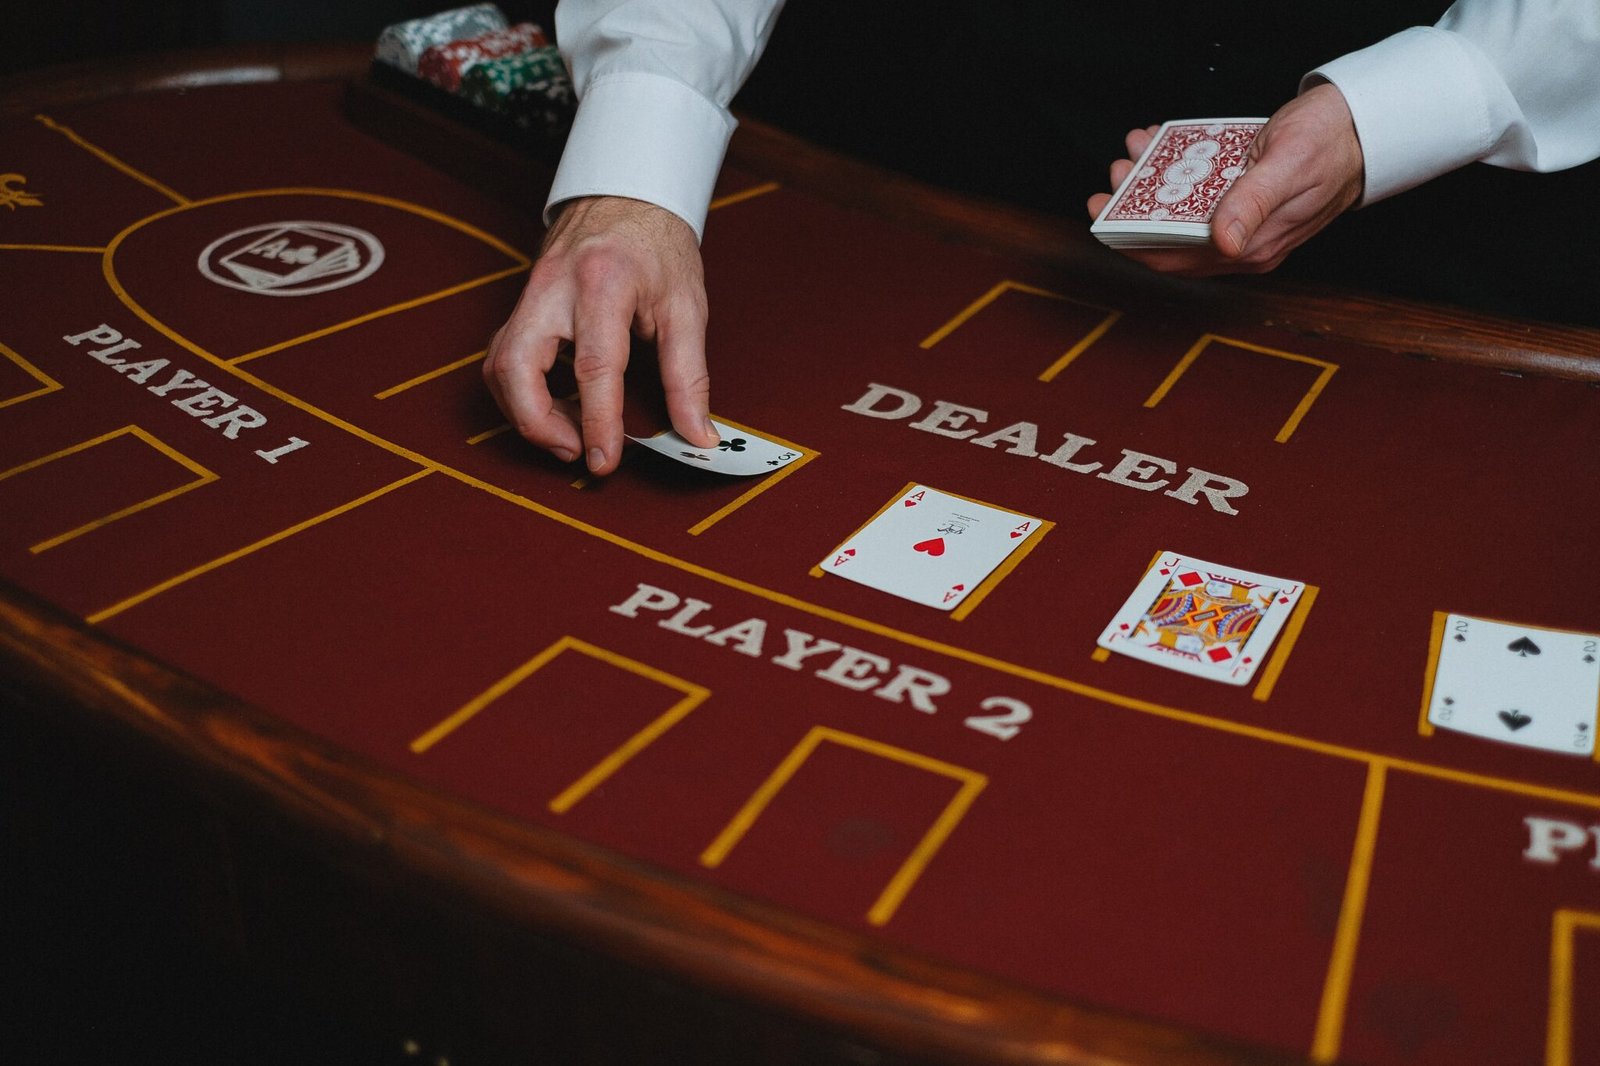 Image Source: https://www.pexels.com/photo/croupier-with-cards-in-casino-6664126/